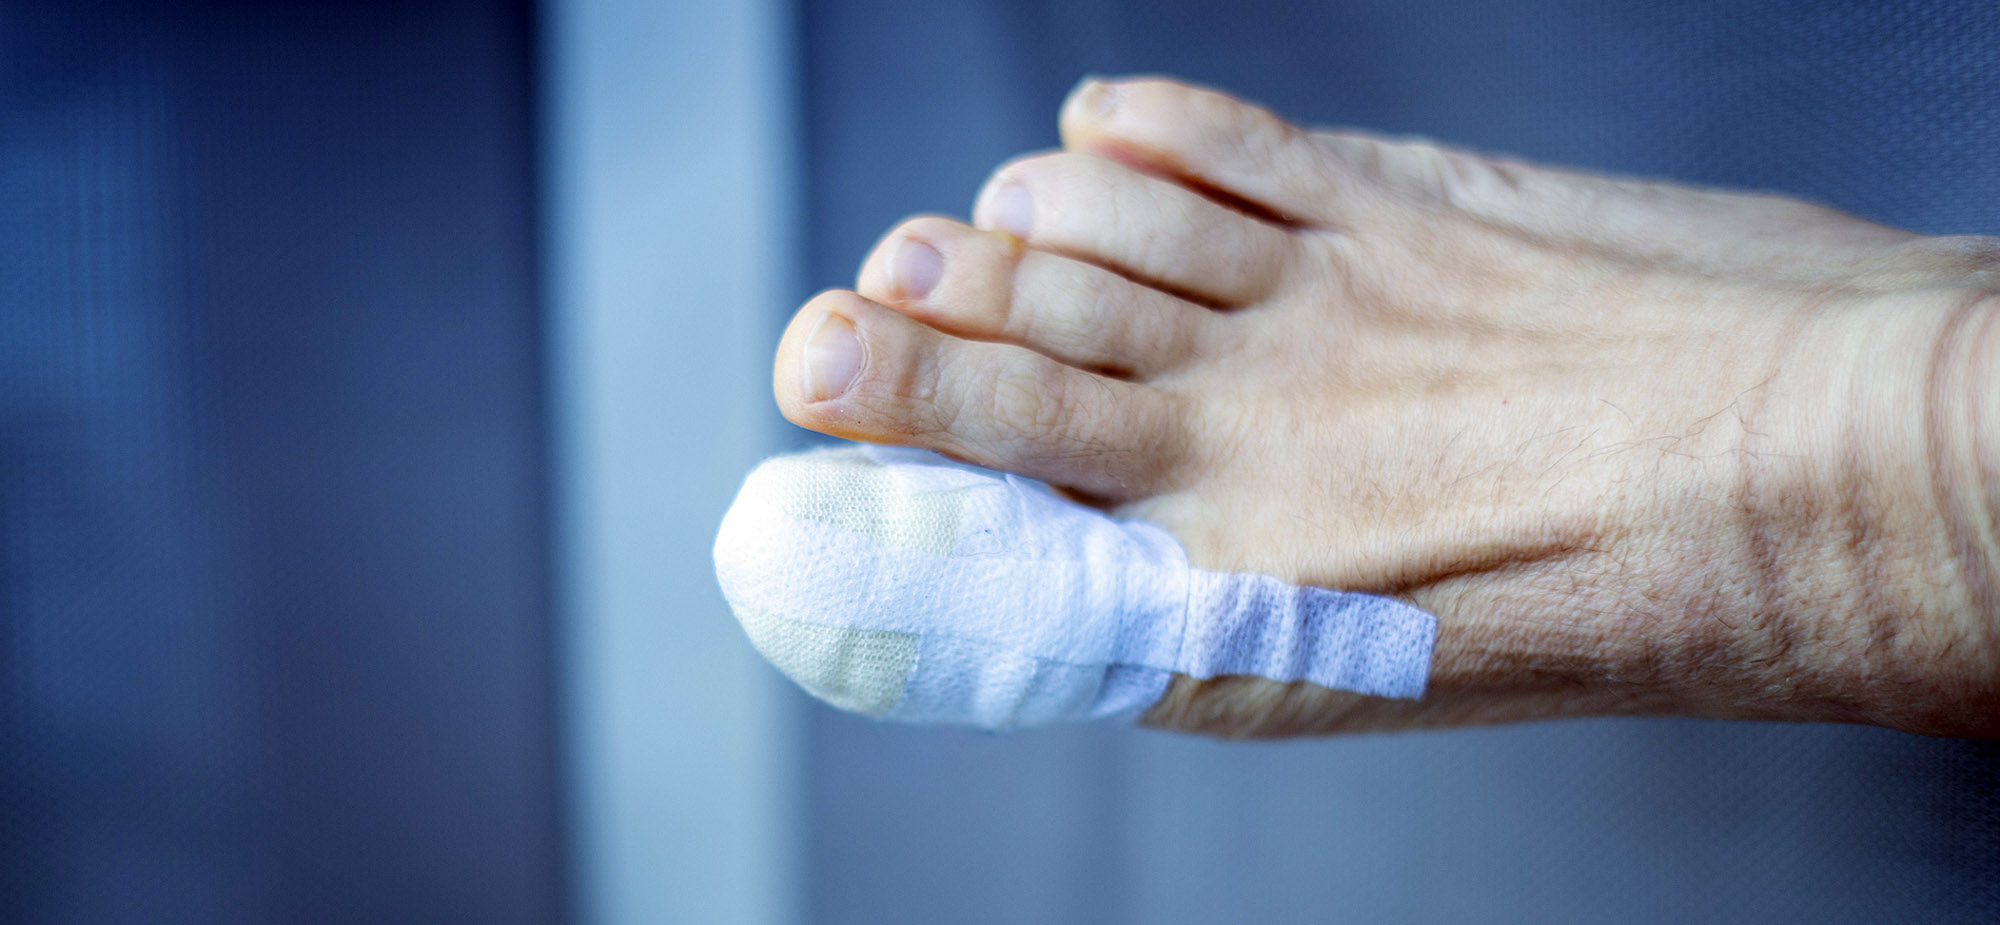 Diabetic Wound Care - Toe Strapped for diabetic ulcers treated by Manuka Honey